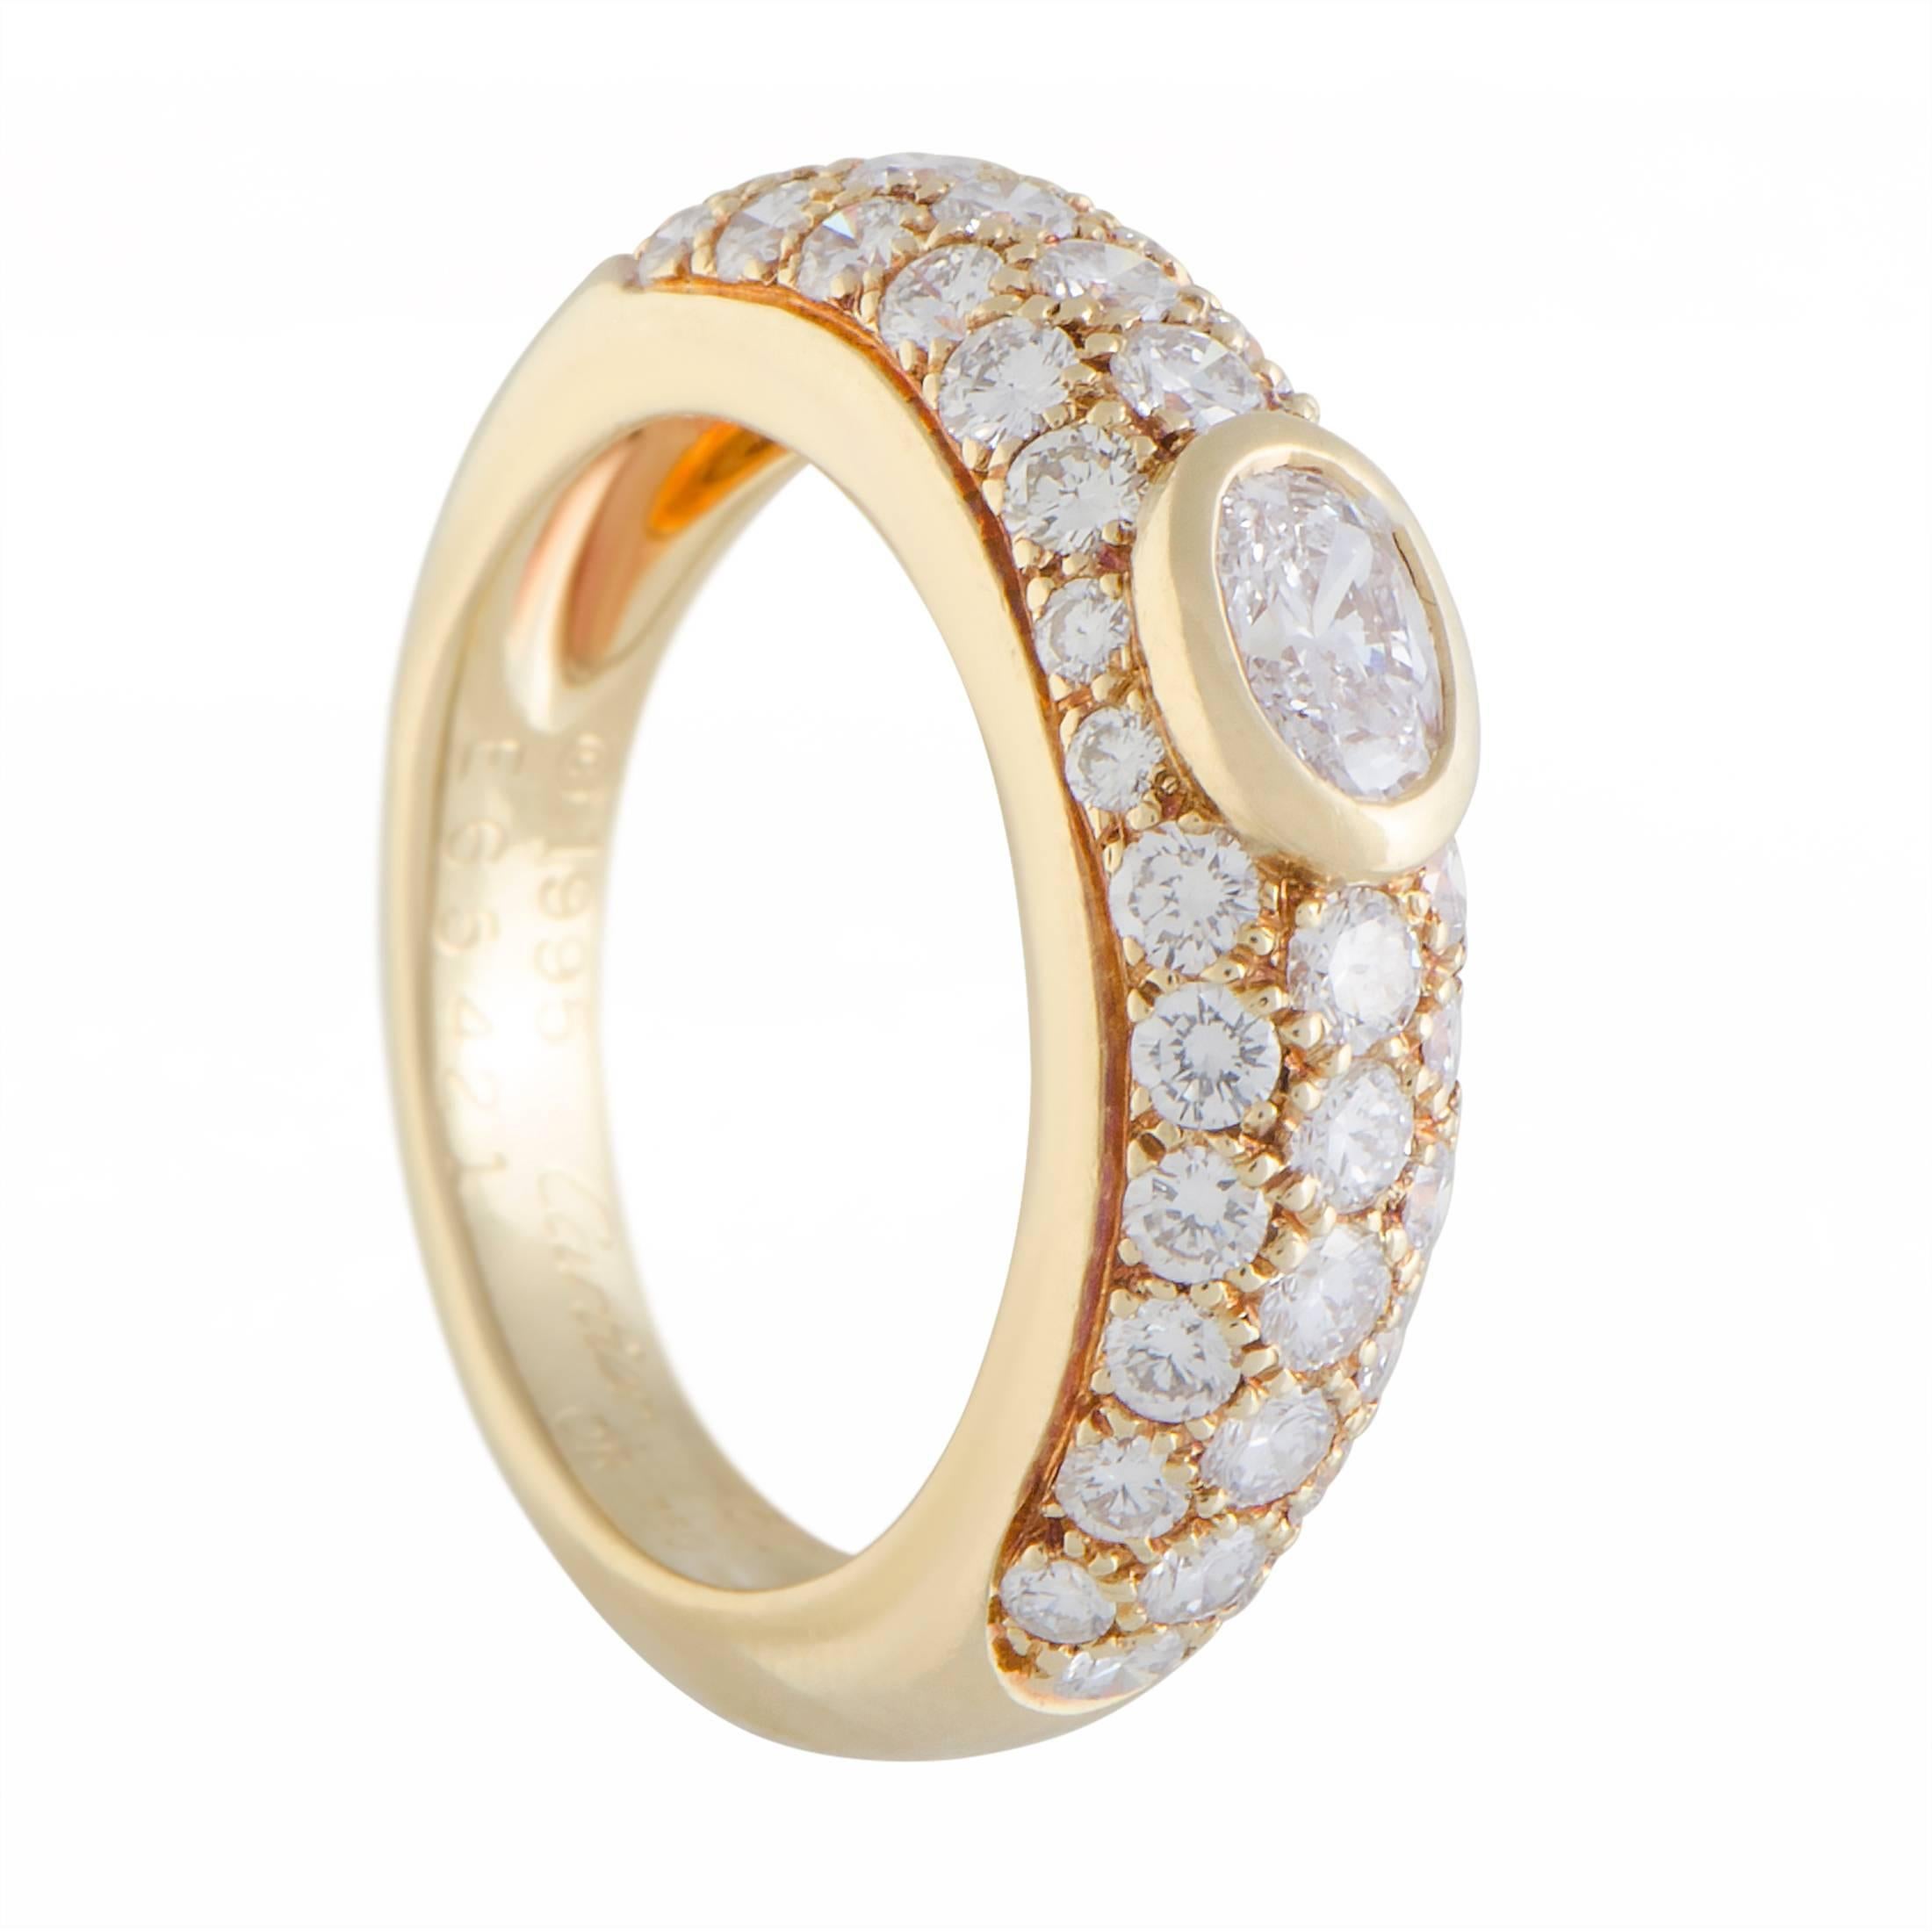 Cartier Diamond and Gold Engagement Ring